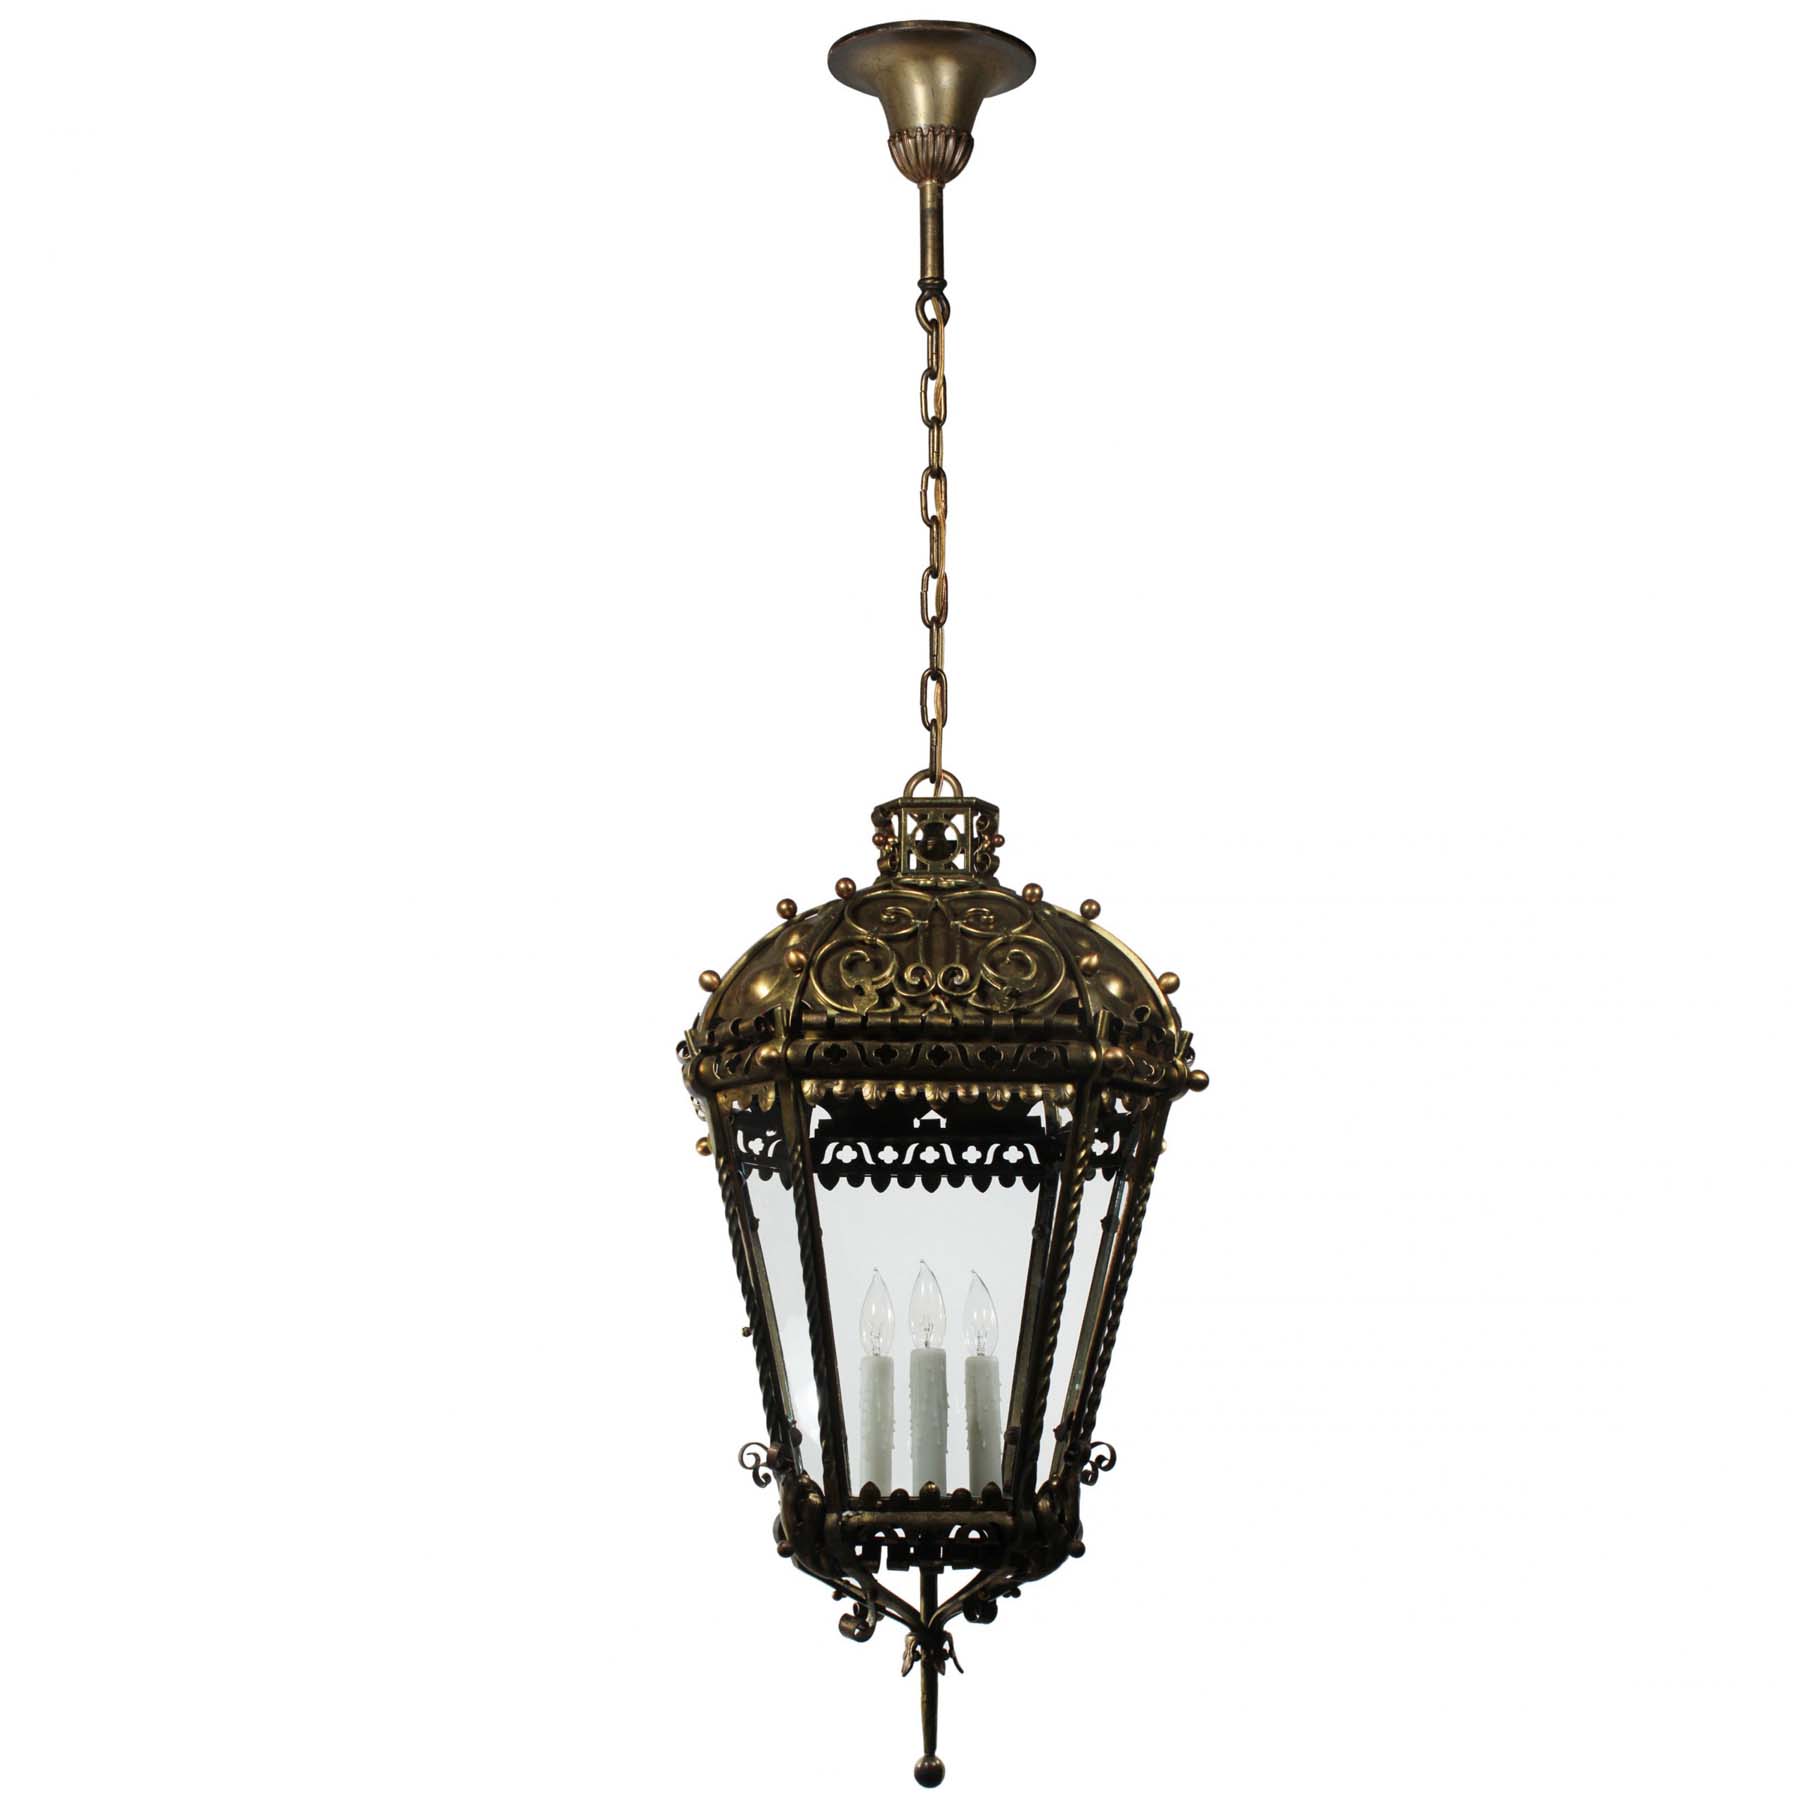 SOLD Substantial Antique Brass Three-Light Lantern Chandelier, Early 1900s-69659